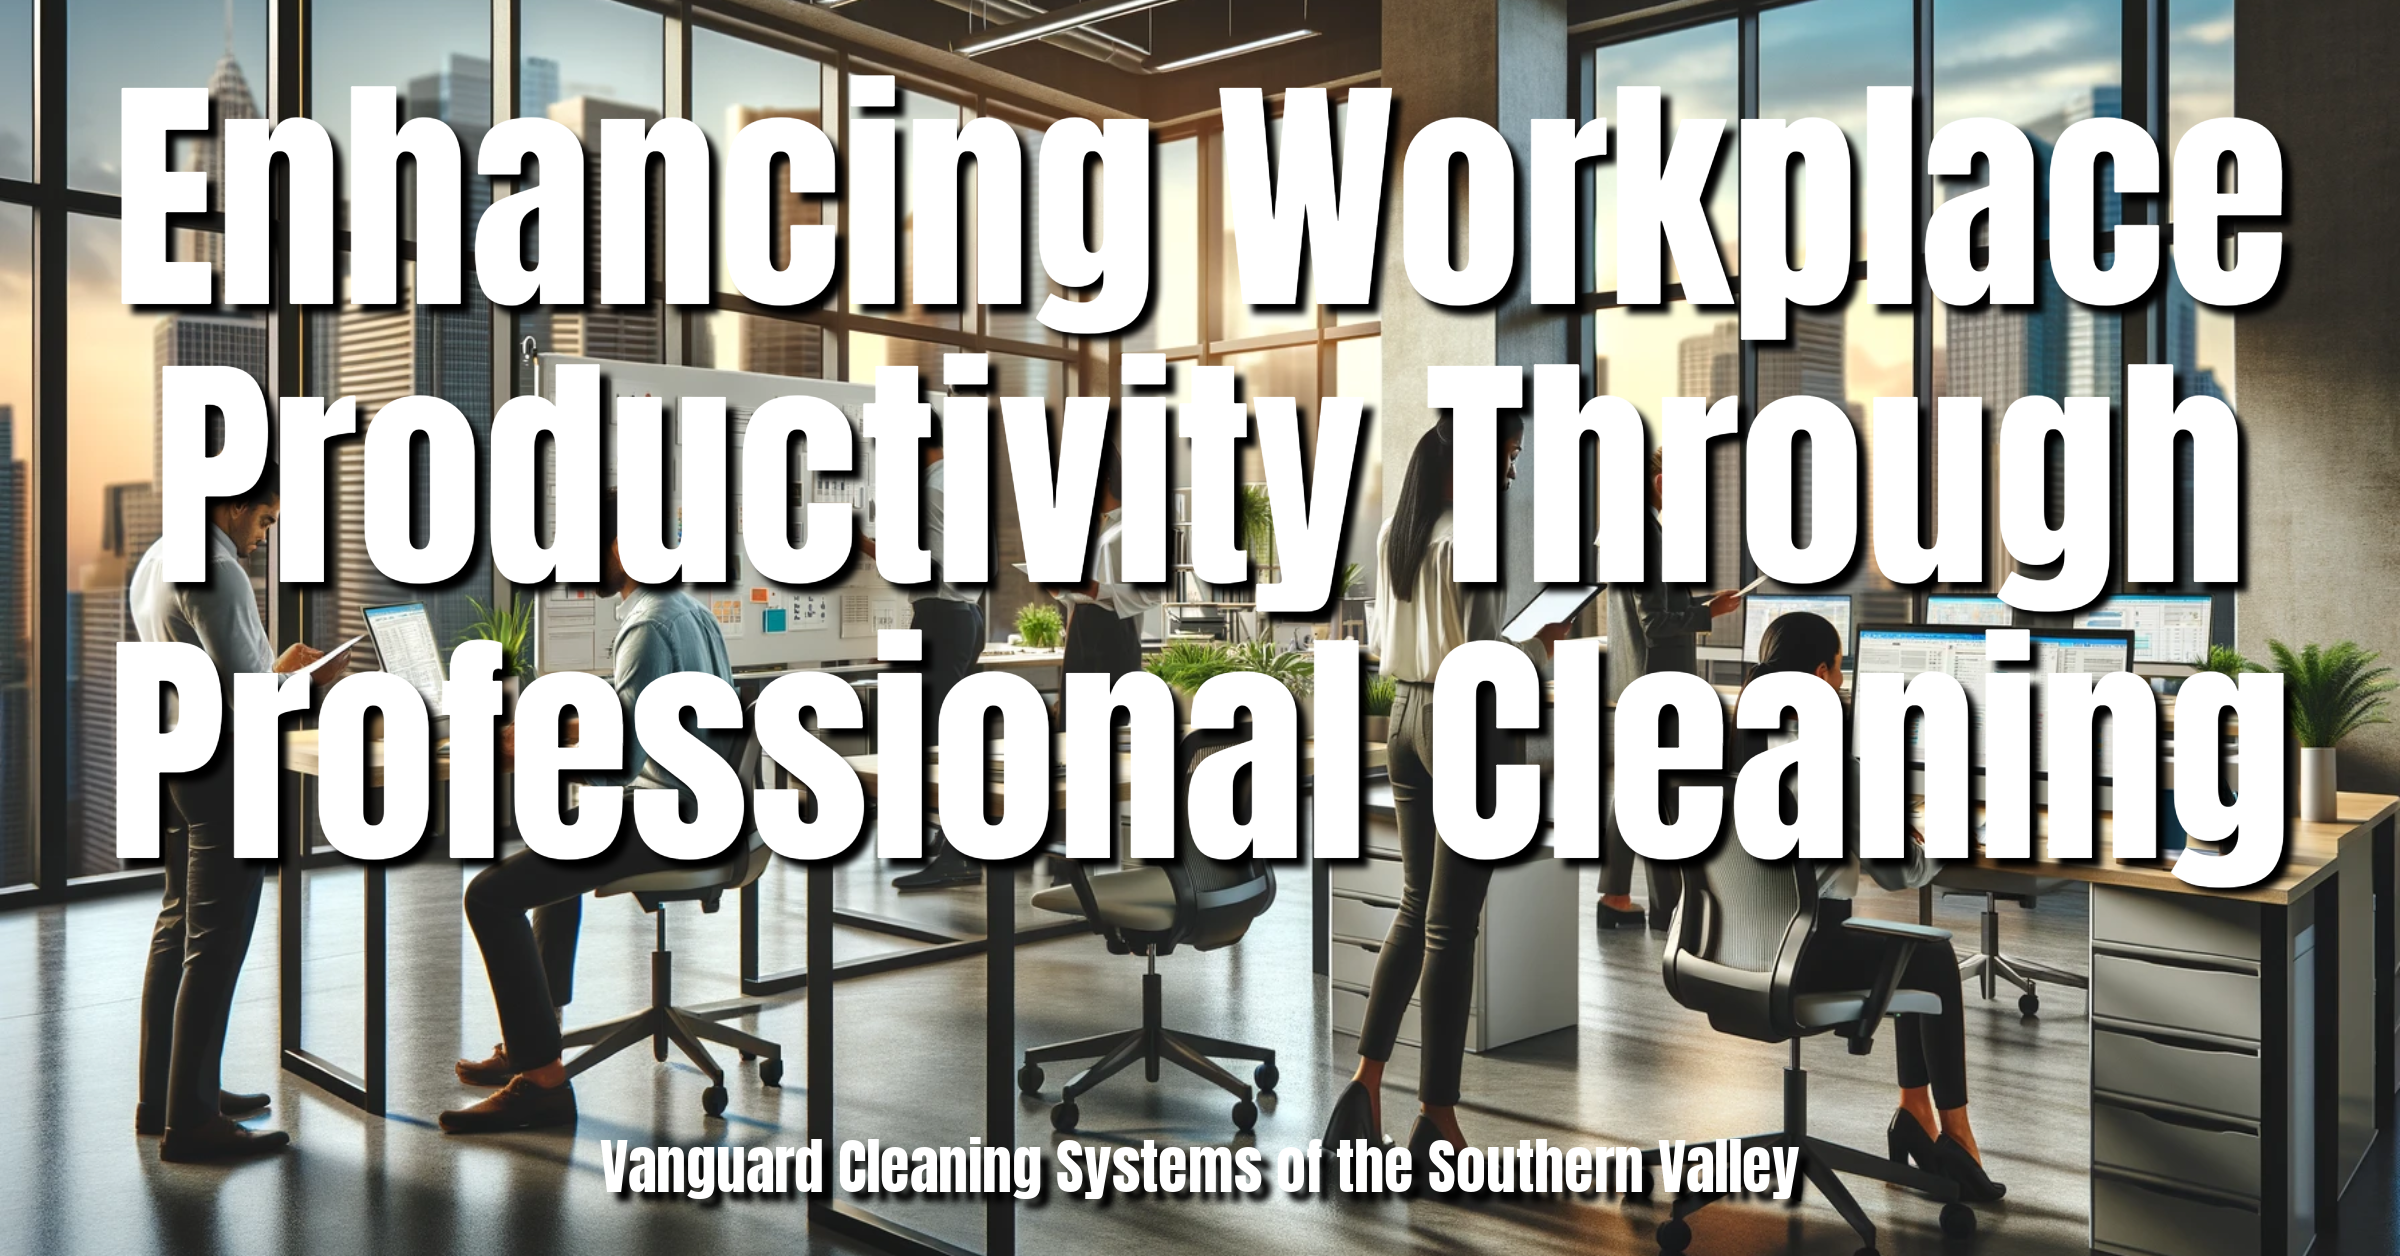 Enhancing Workplace Productivity Through Professional Cleaning